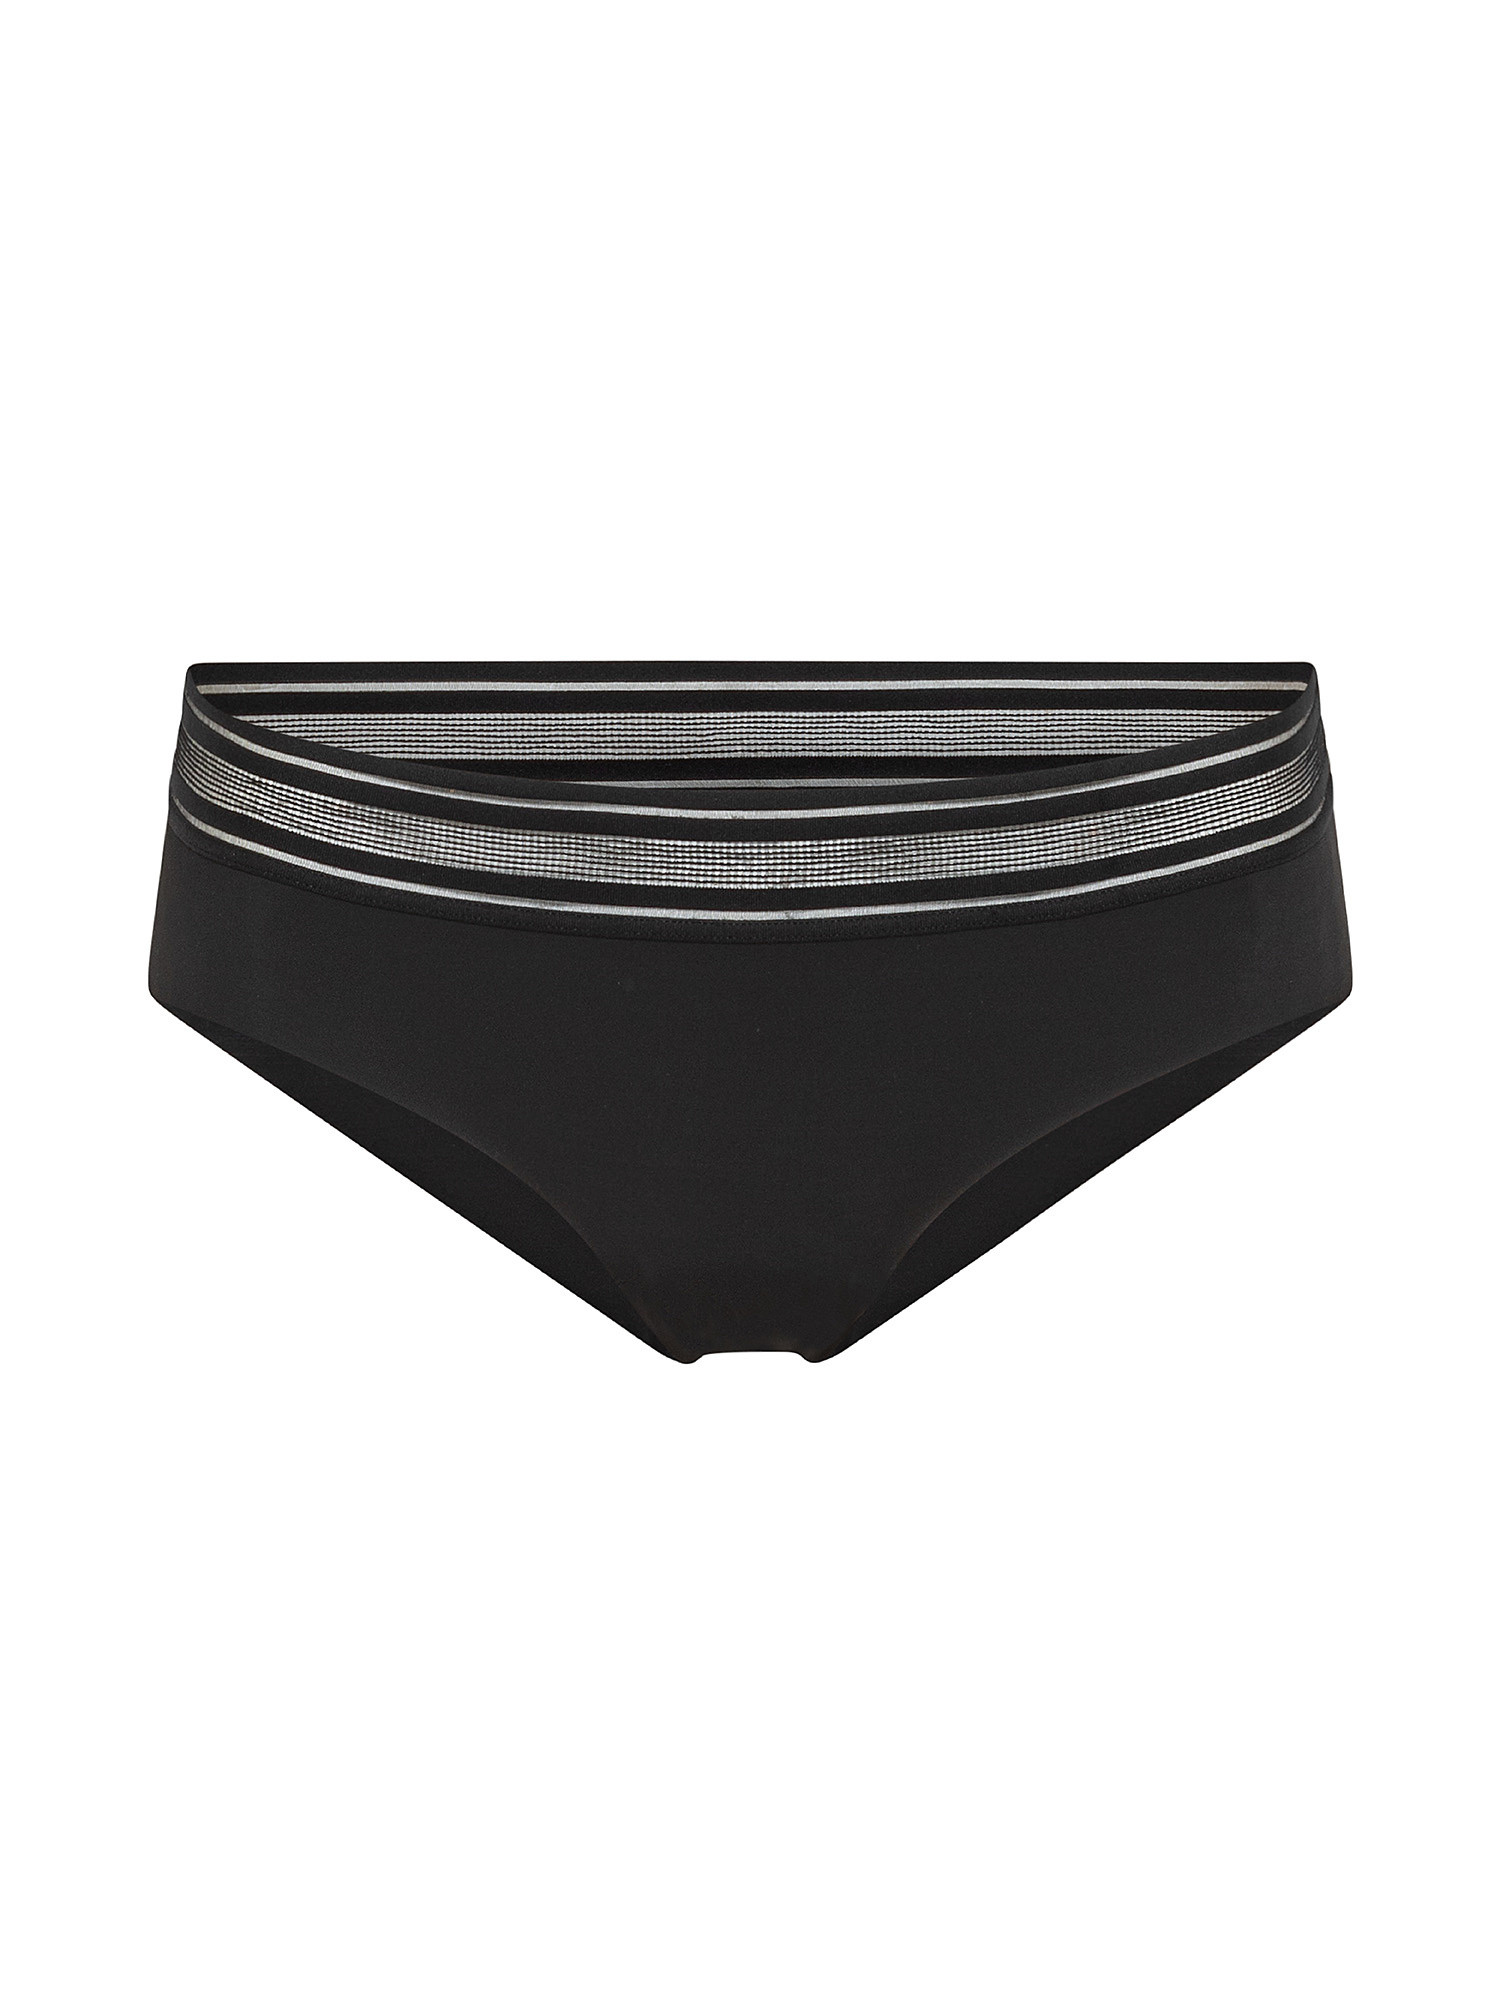 Briefs with graphic elastic band, Black, large image number 0